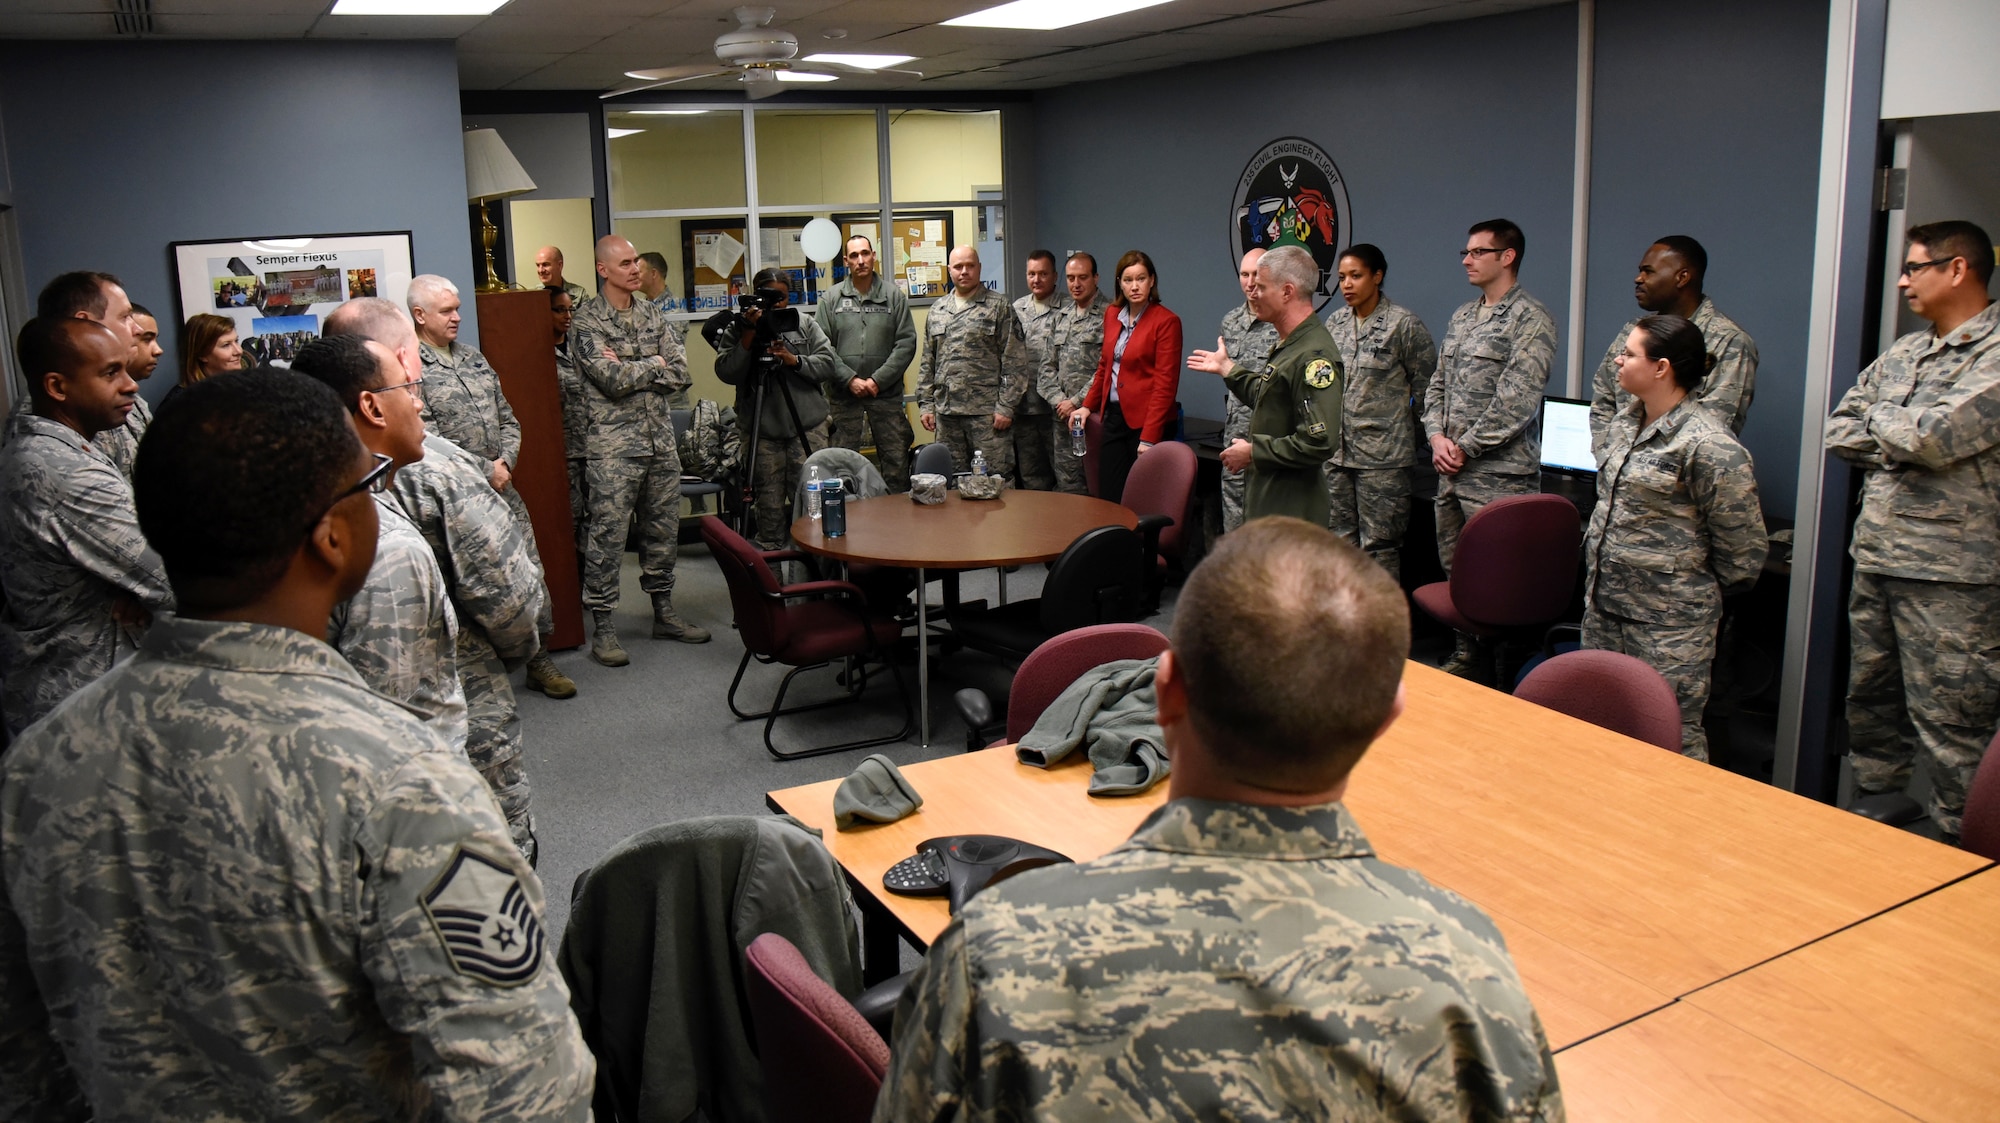 Colonel Paul Johnson, vice wing commander of the 175th Wing, addresses the tour group February 10, 2018, during a base tour for the Director of the Air National Guard and Command Chief Master Sergeant of the Air Force at Warfield Air National Guard Base, Middle River, Md.